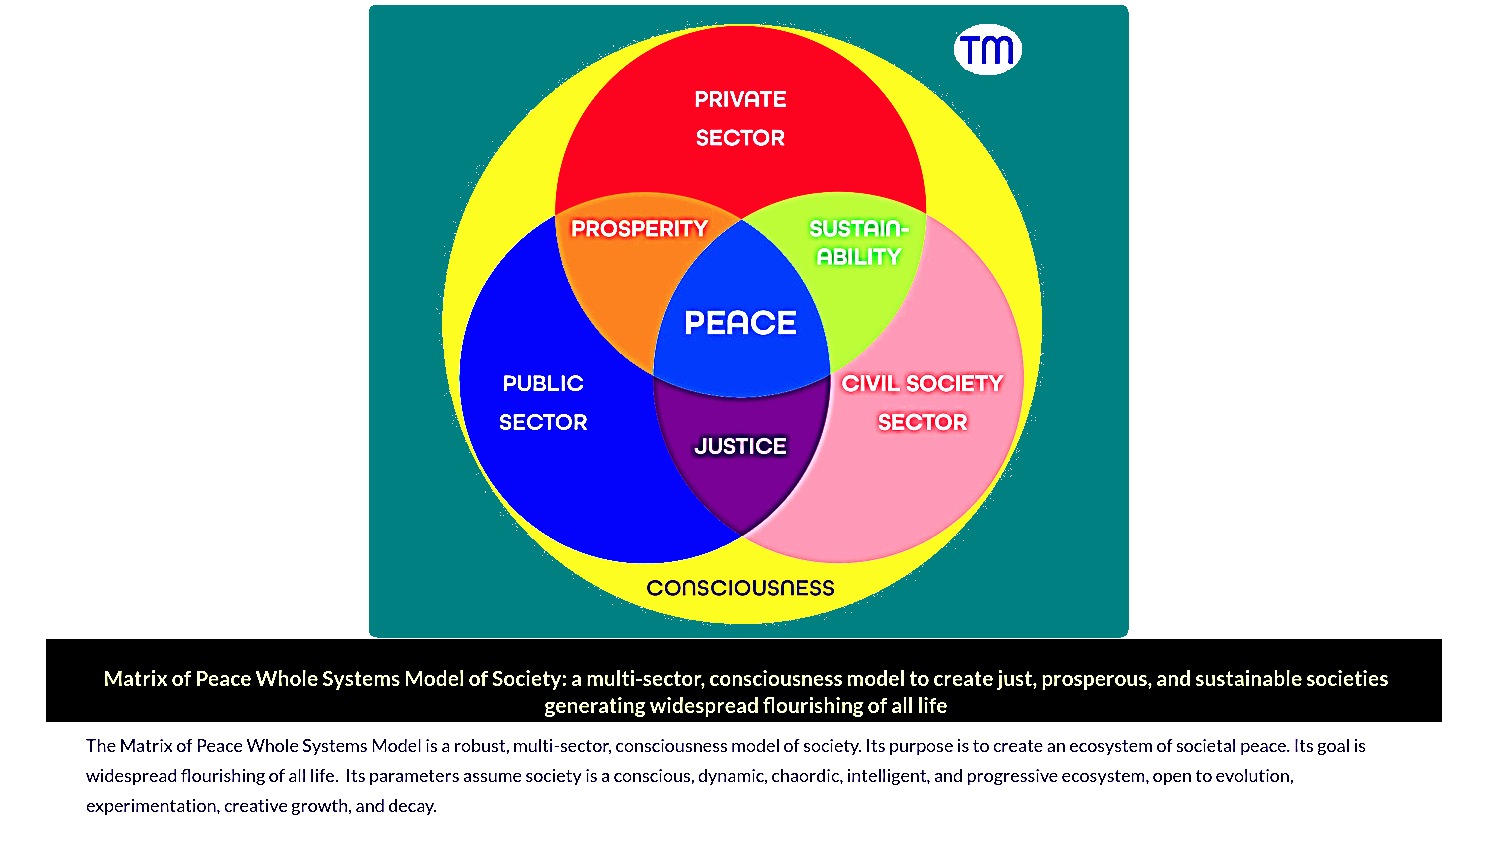 Peace-Building with a Whole Systems Approach for the End of Structural Violence – Sociology